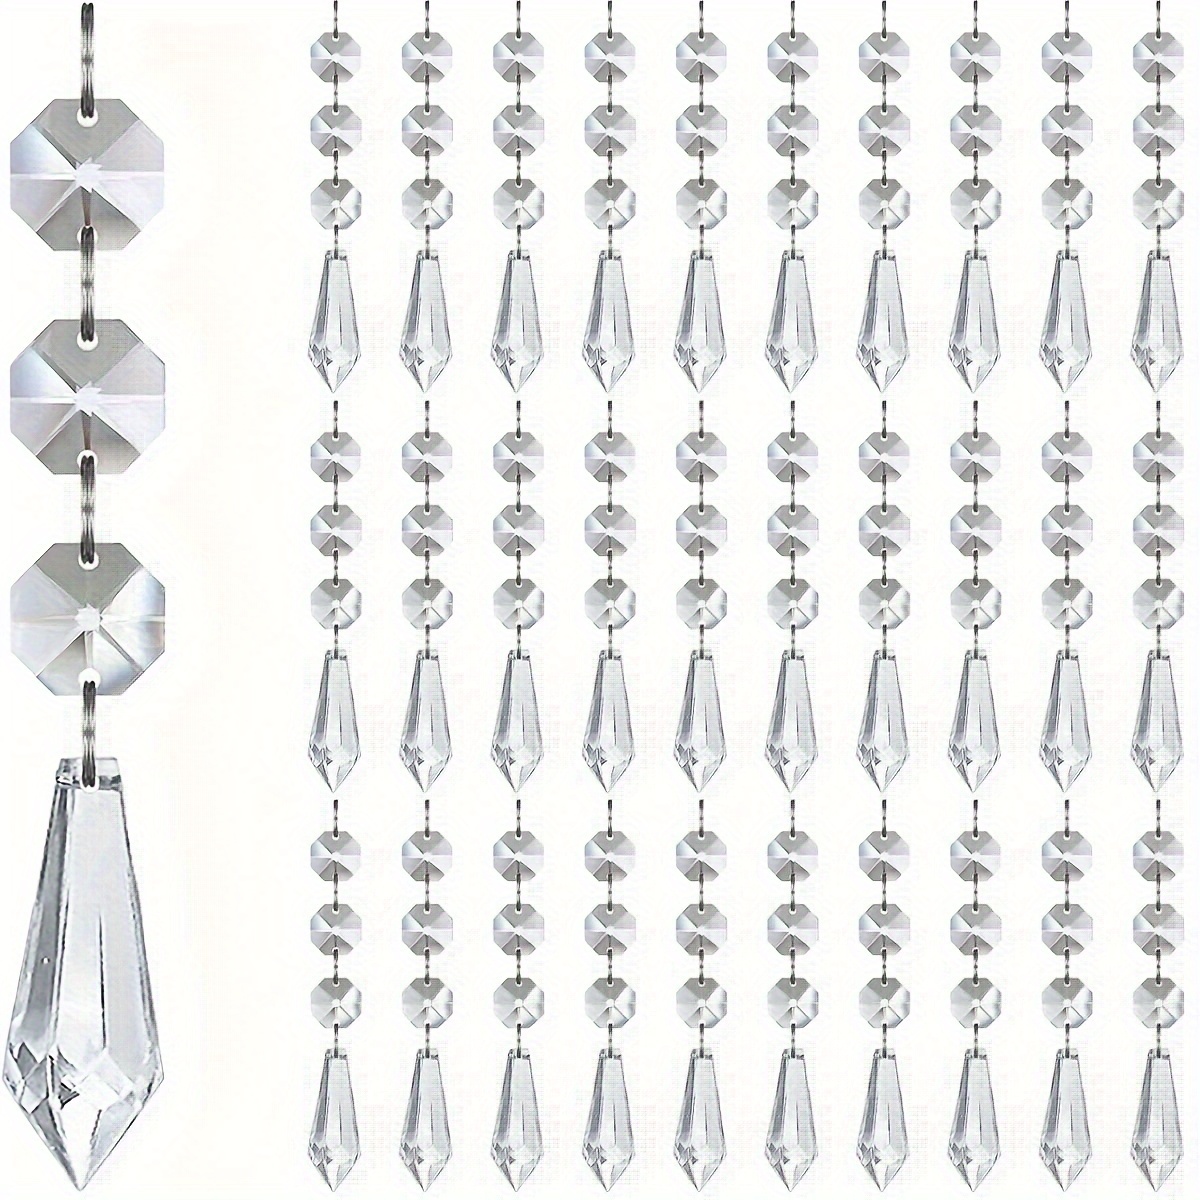 

15pcs Clear Plastic Hanging Crystals, Decorative Icicle Drops With Octagonal Beads, Elegant Chandelier Pendants For Home Decor & Events